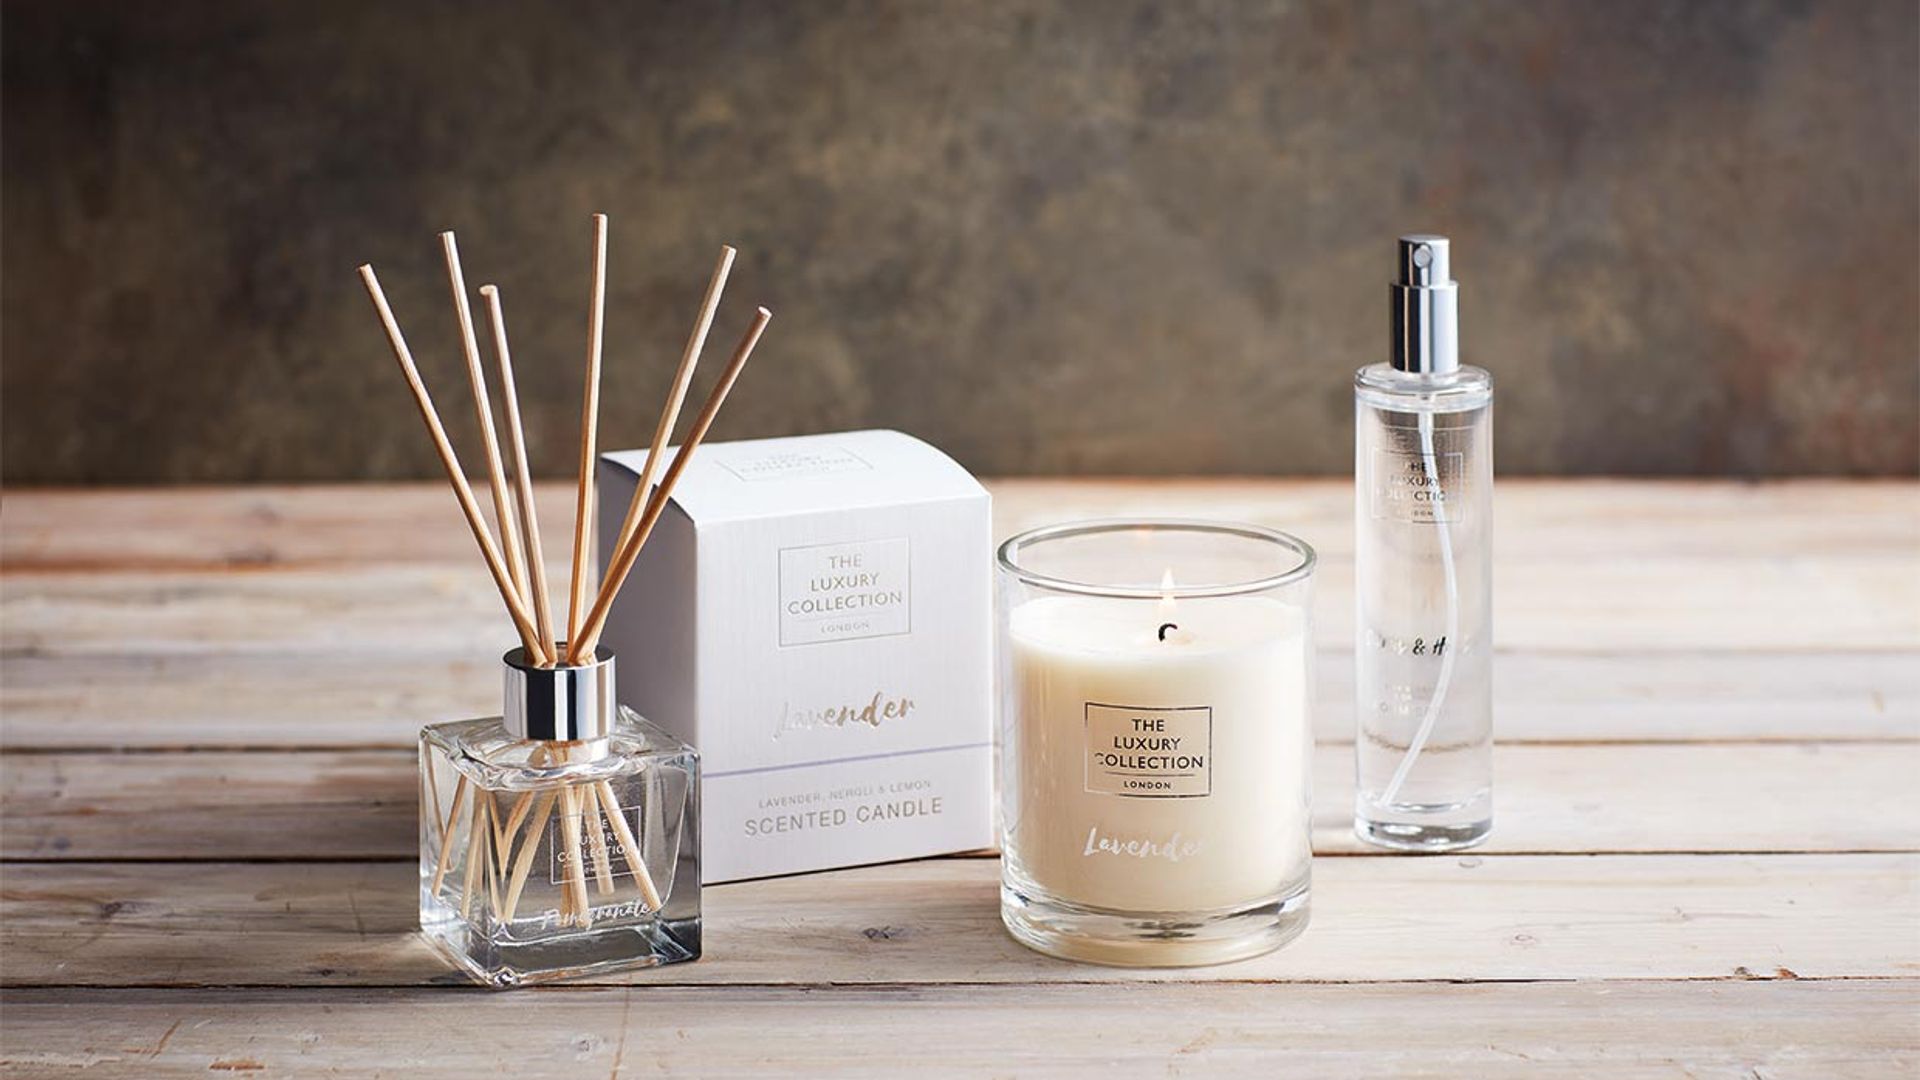 Lidl luxury candles